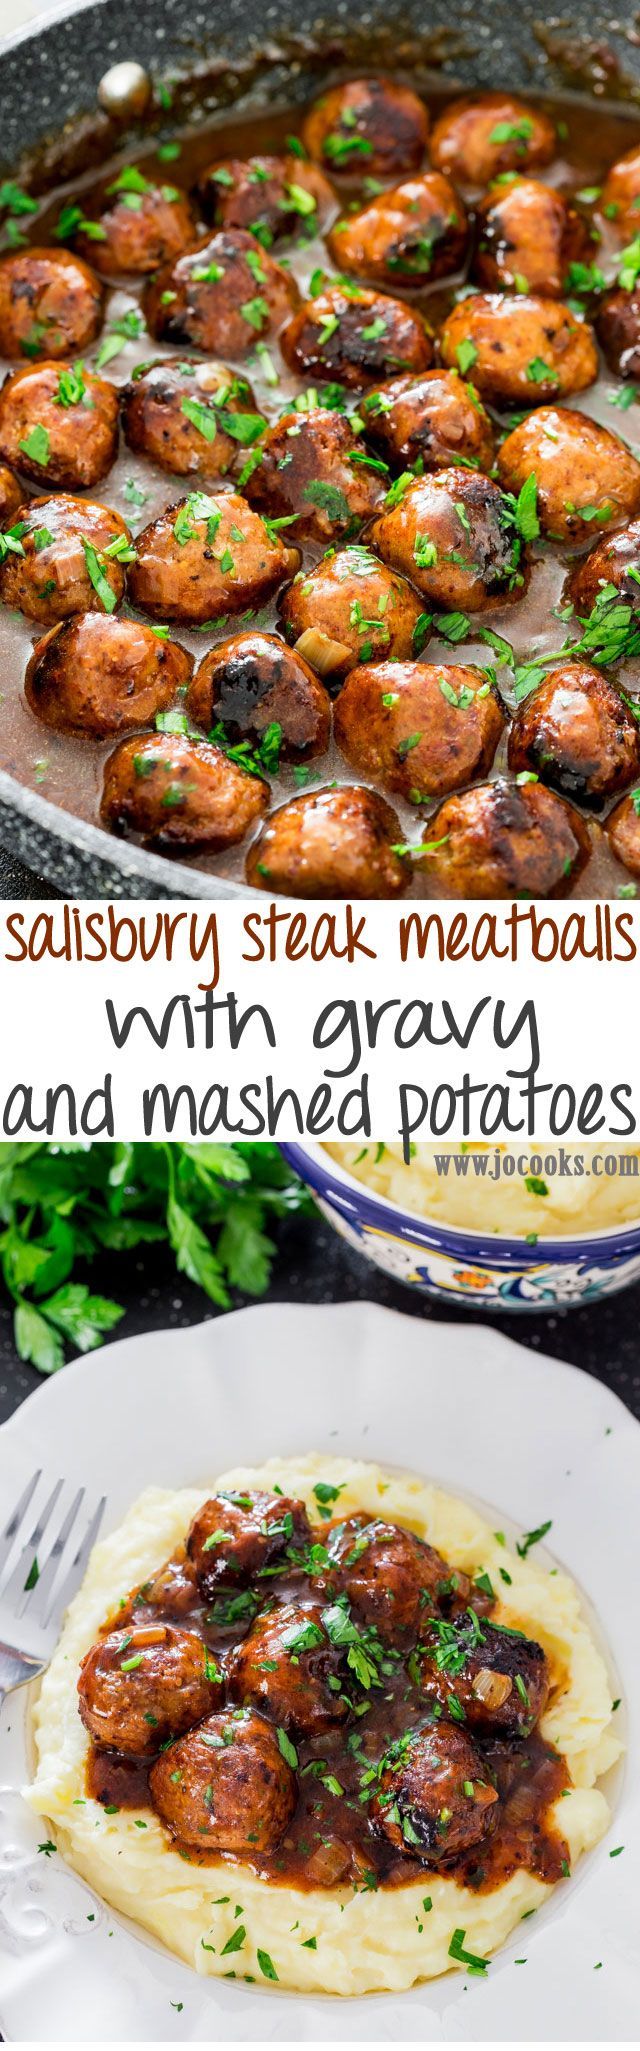 These Salisbury Steak Meatballs with Gravy and Mashed Potatoes are a classic and a true comfort food. An incredibly delicious and